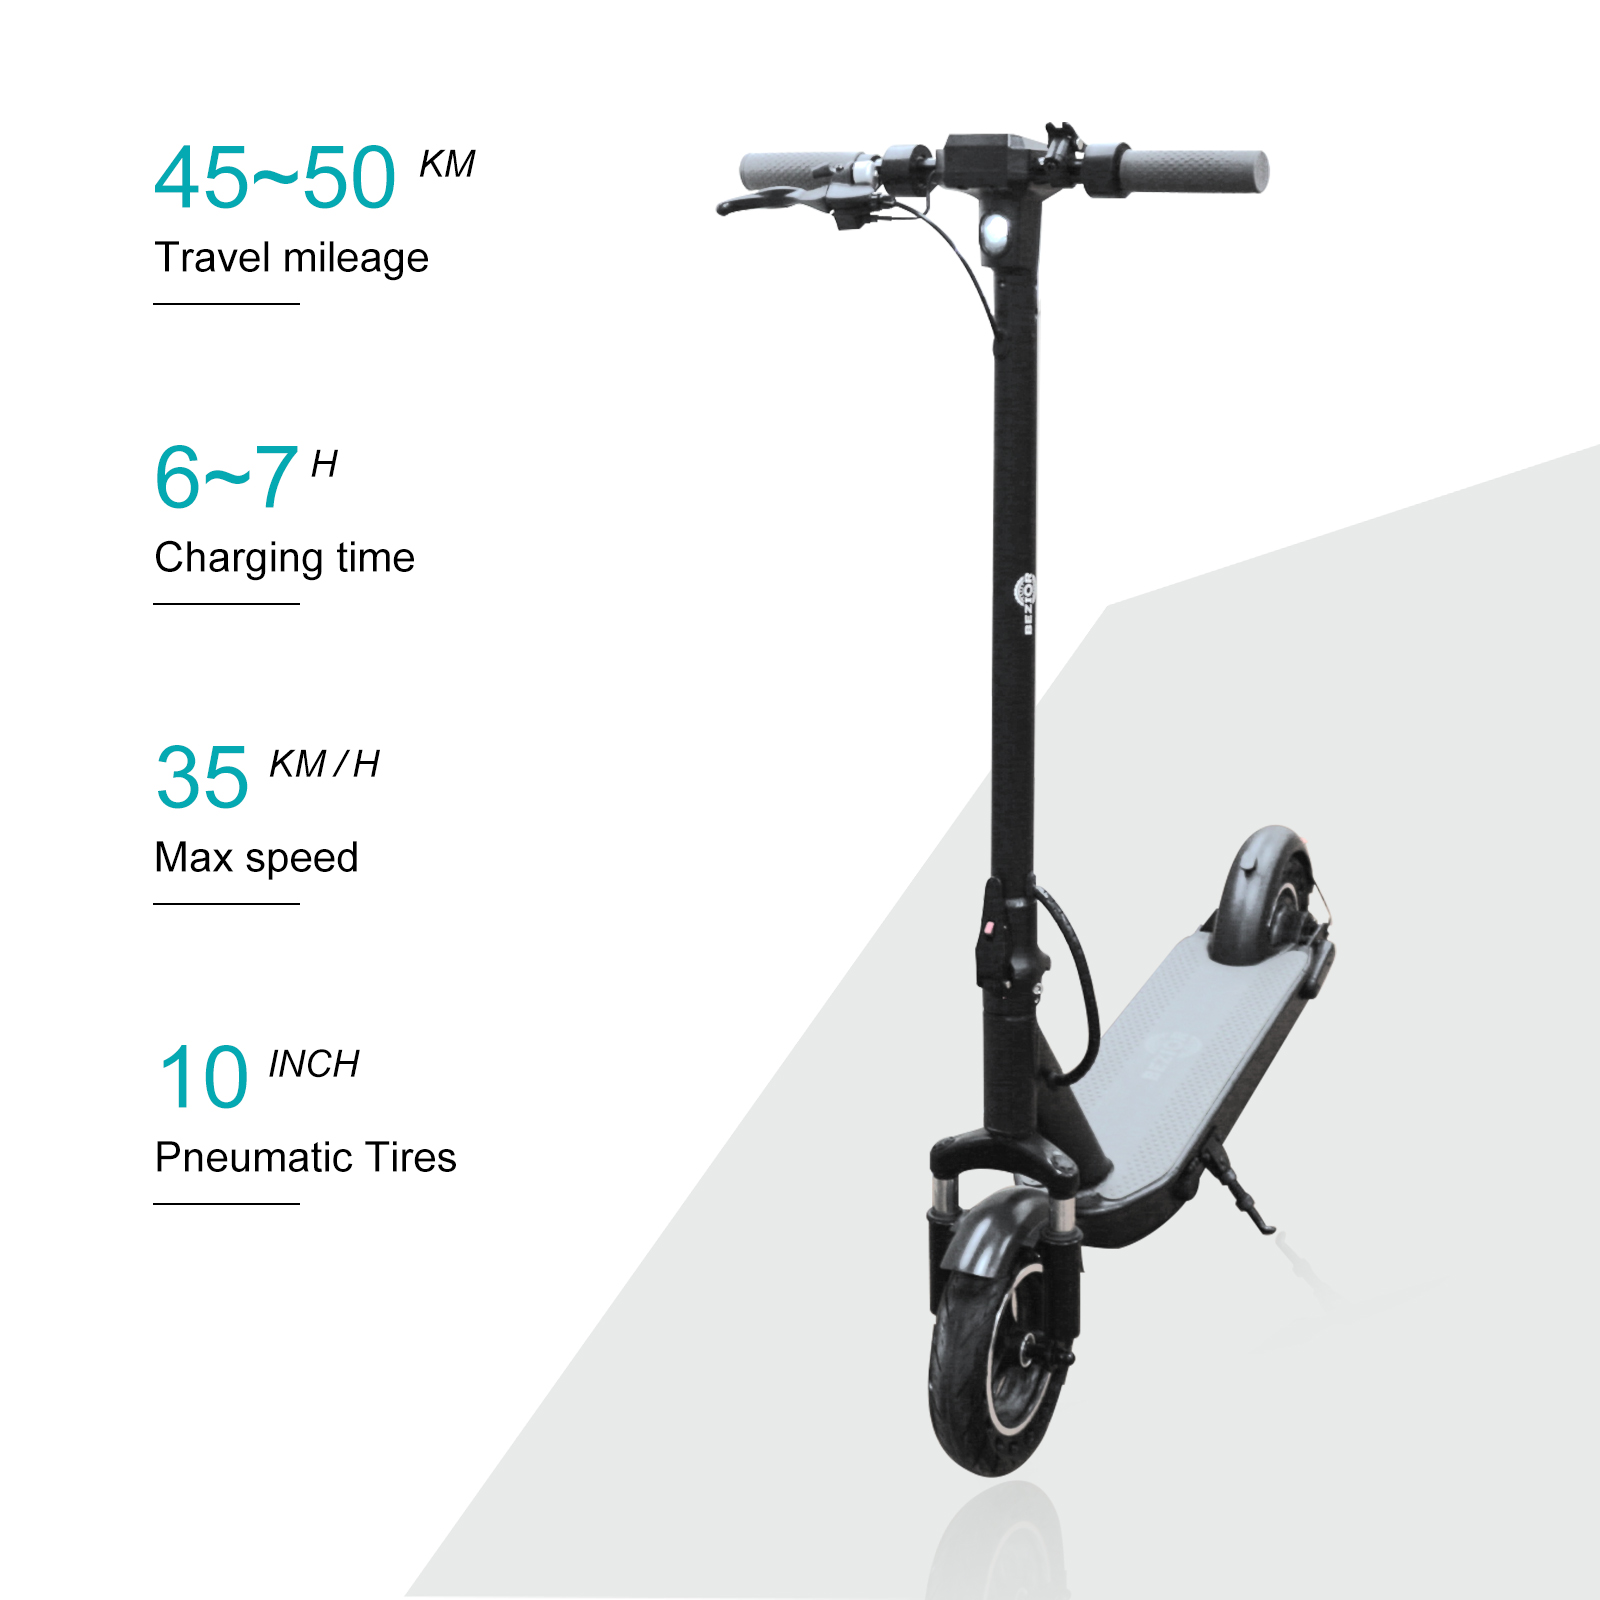 BEZIOR S500 MAX 10 inch Vaccum Pump tires Folding Electric Scooter 500W Motor 48V 15Ah Battery Max speed 35km/h Max load 120KG - Black